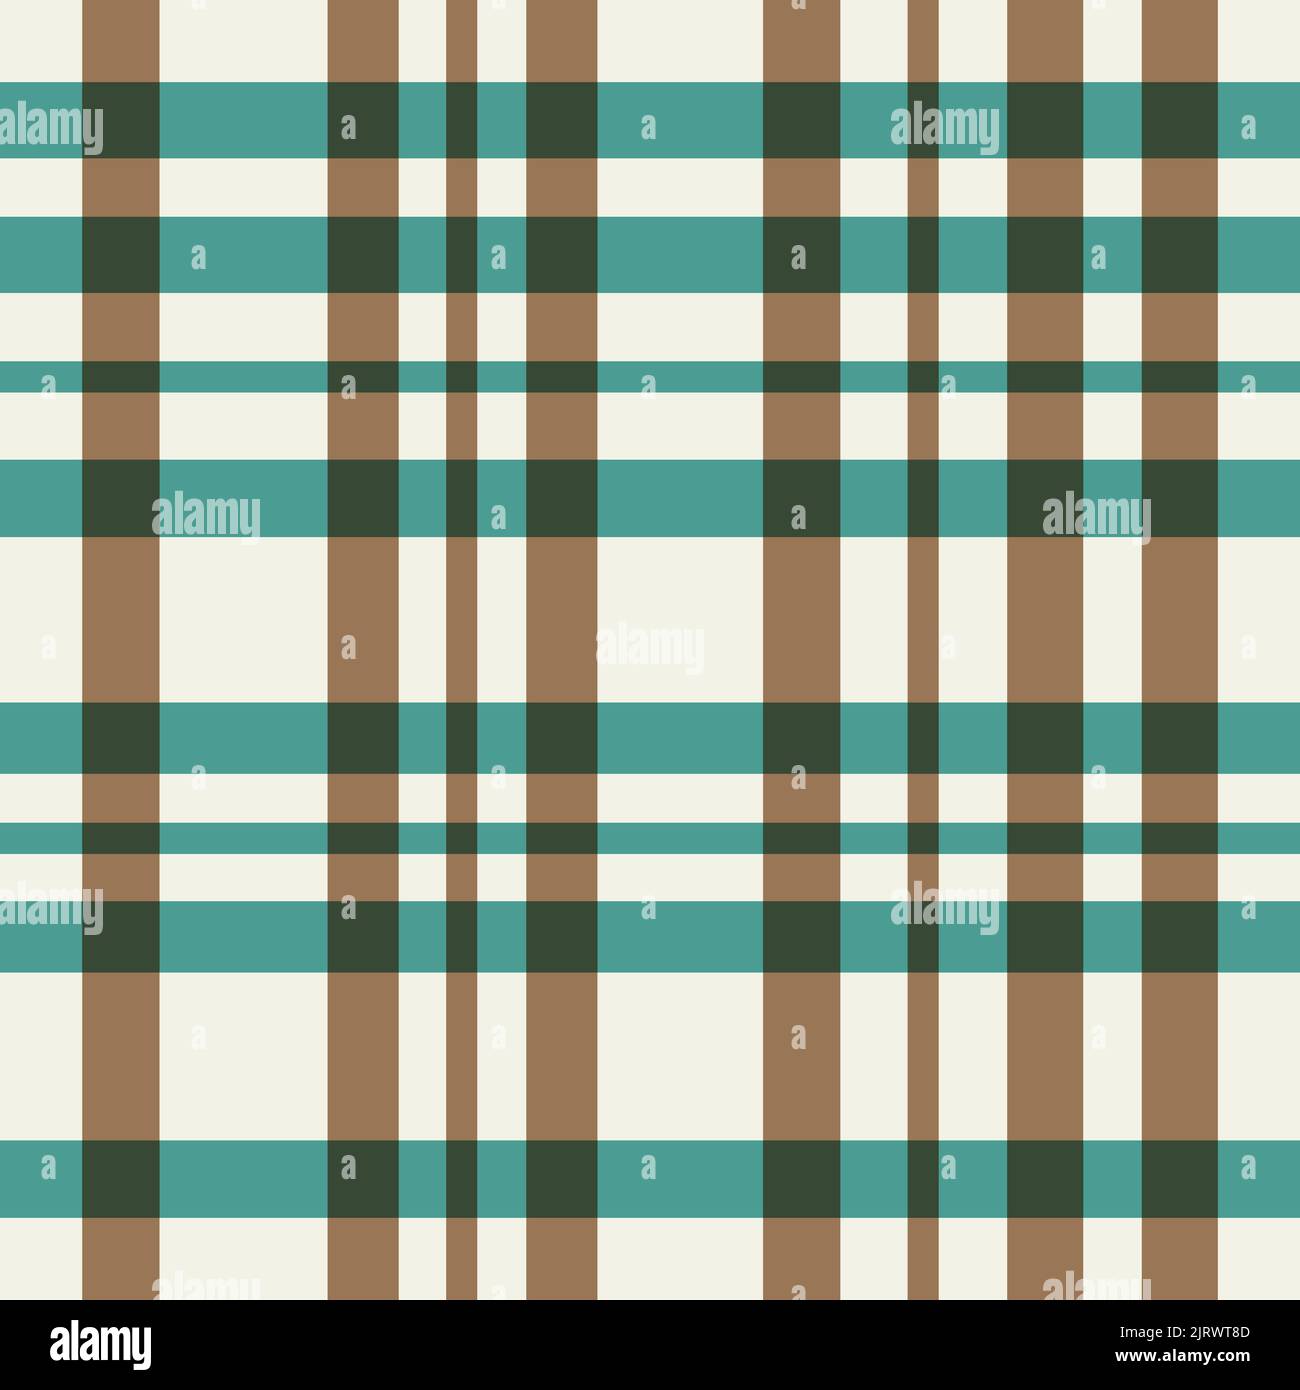 Seamless pattern with plaid motifs in 4 colors Stock Photo - Alamy